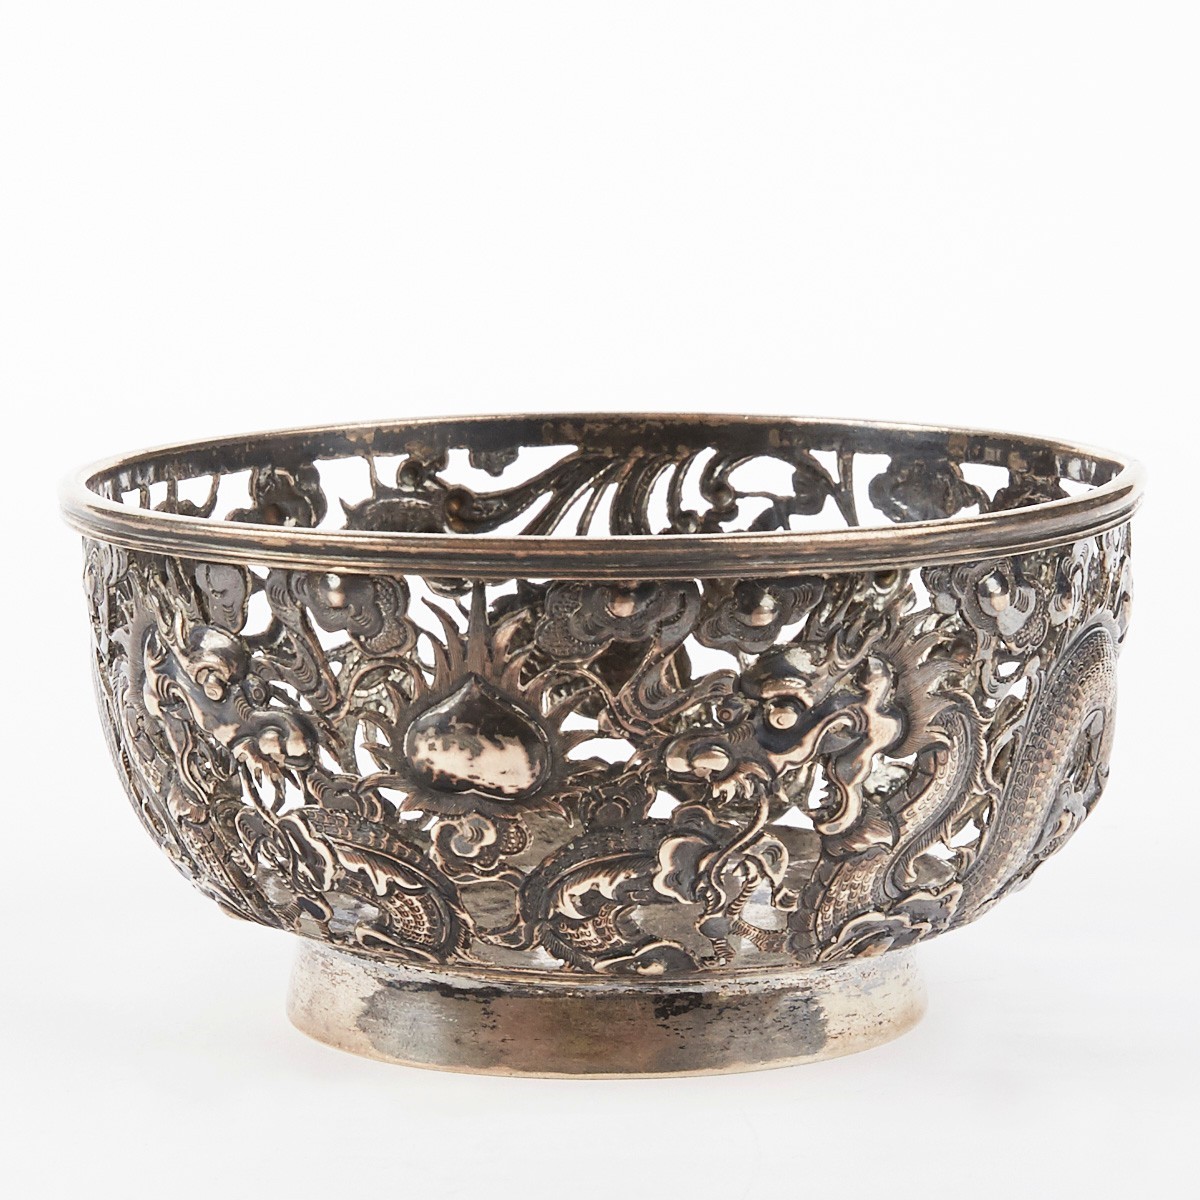 Chinese Export Silver Dragon Bowl - Image 5 of 7